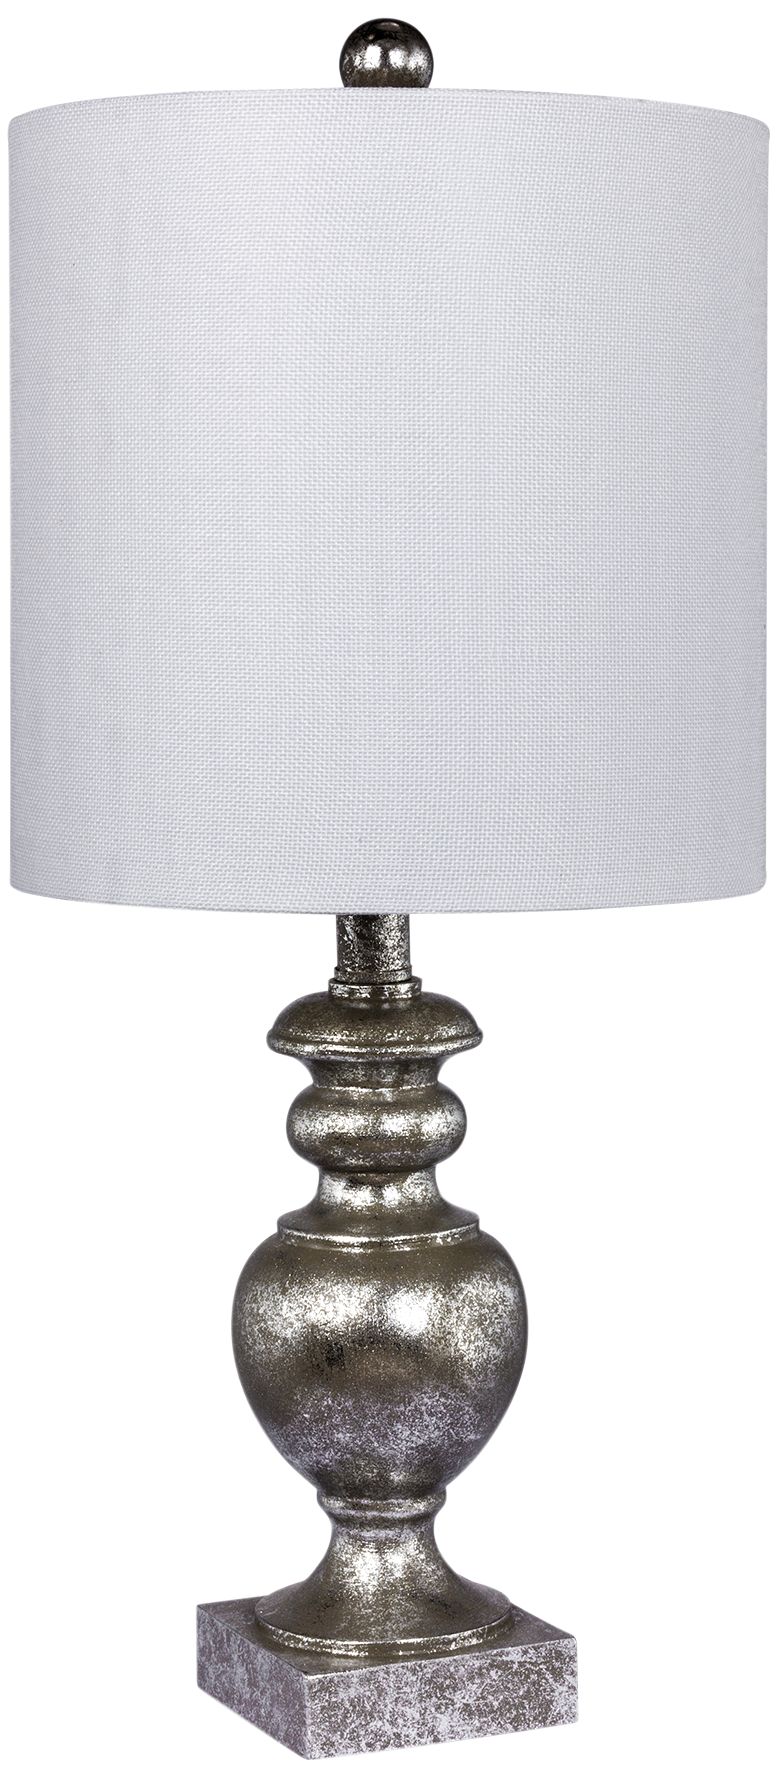 Cairo Antiqued Silver Leaf Textured Urn Accent Table Lamp